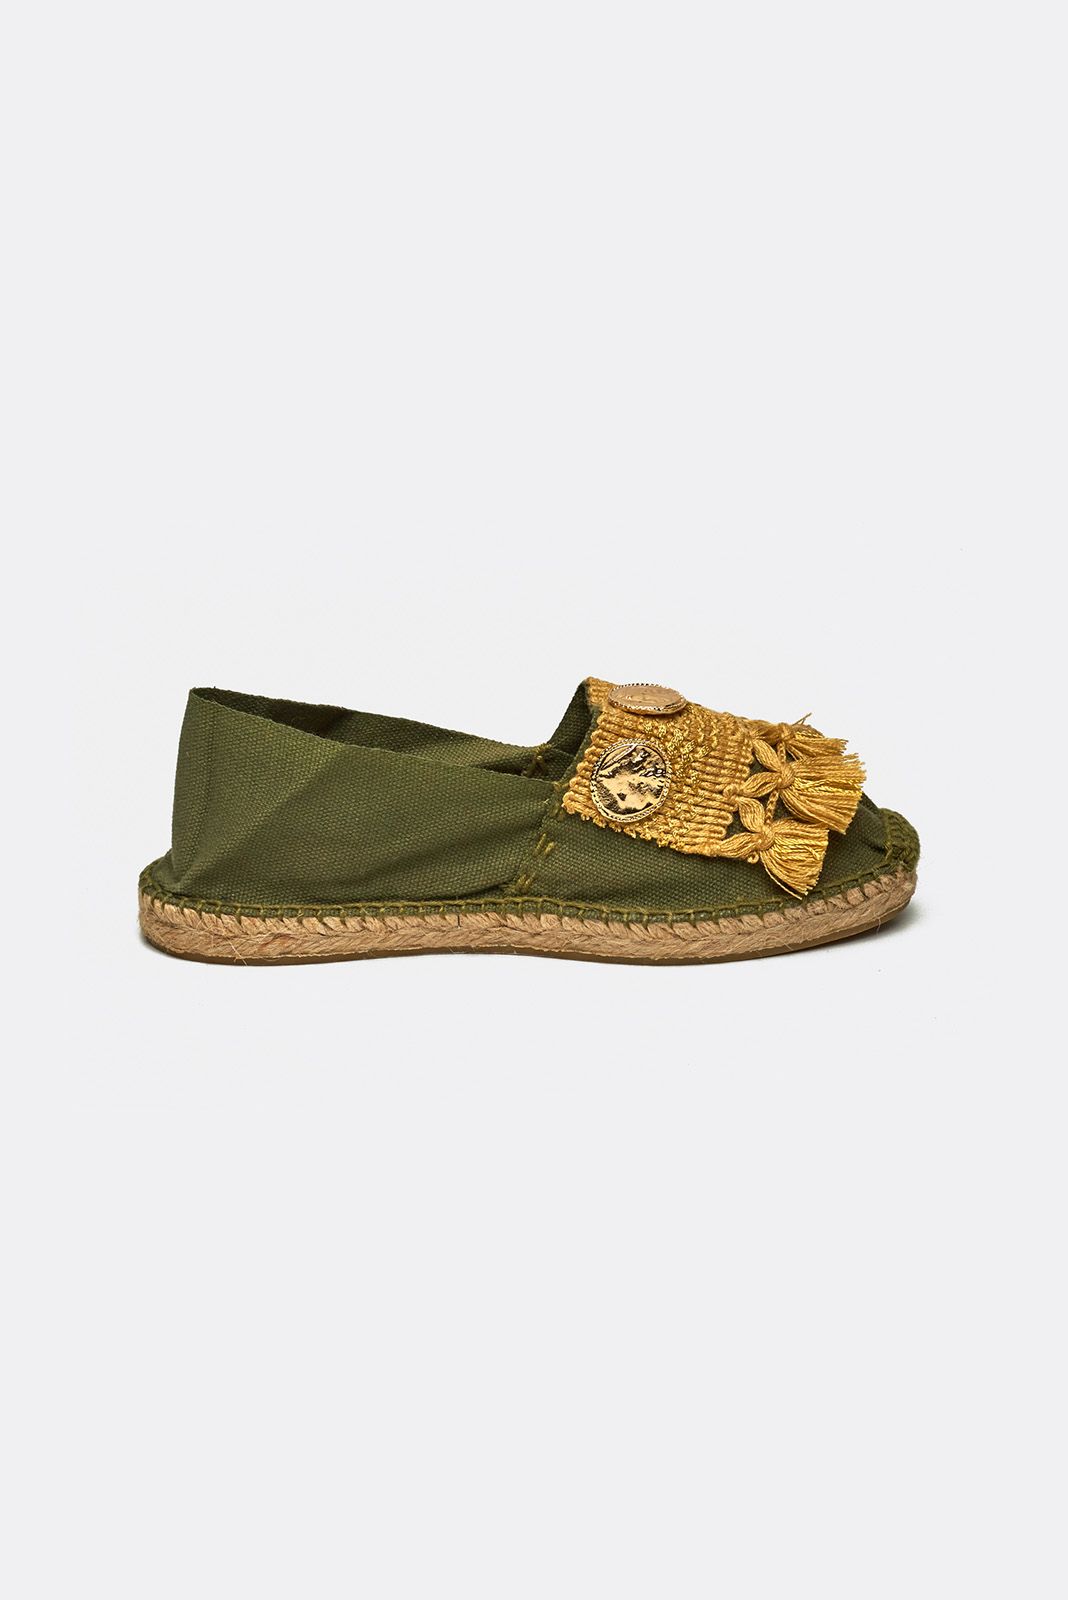 Khaki espadrilles with tassels and six metal coins